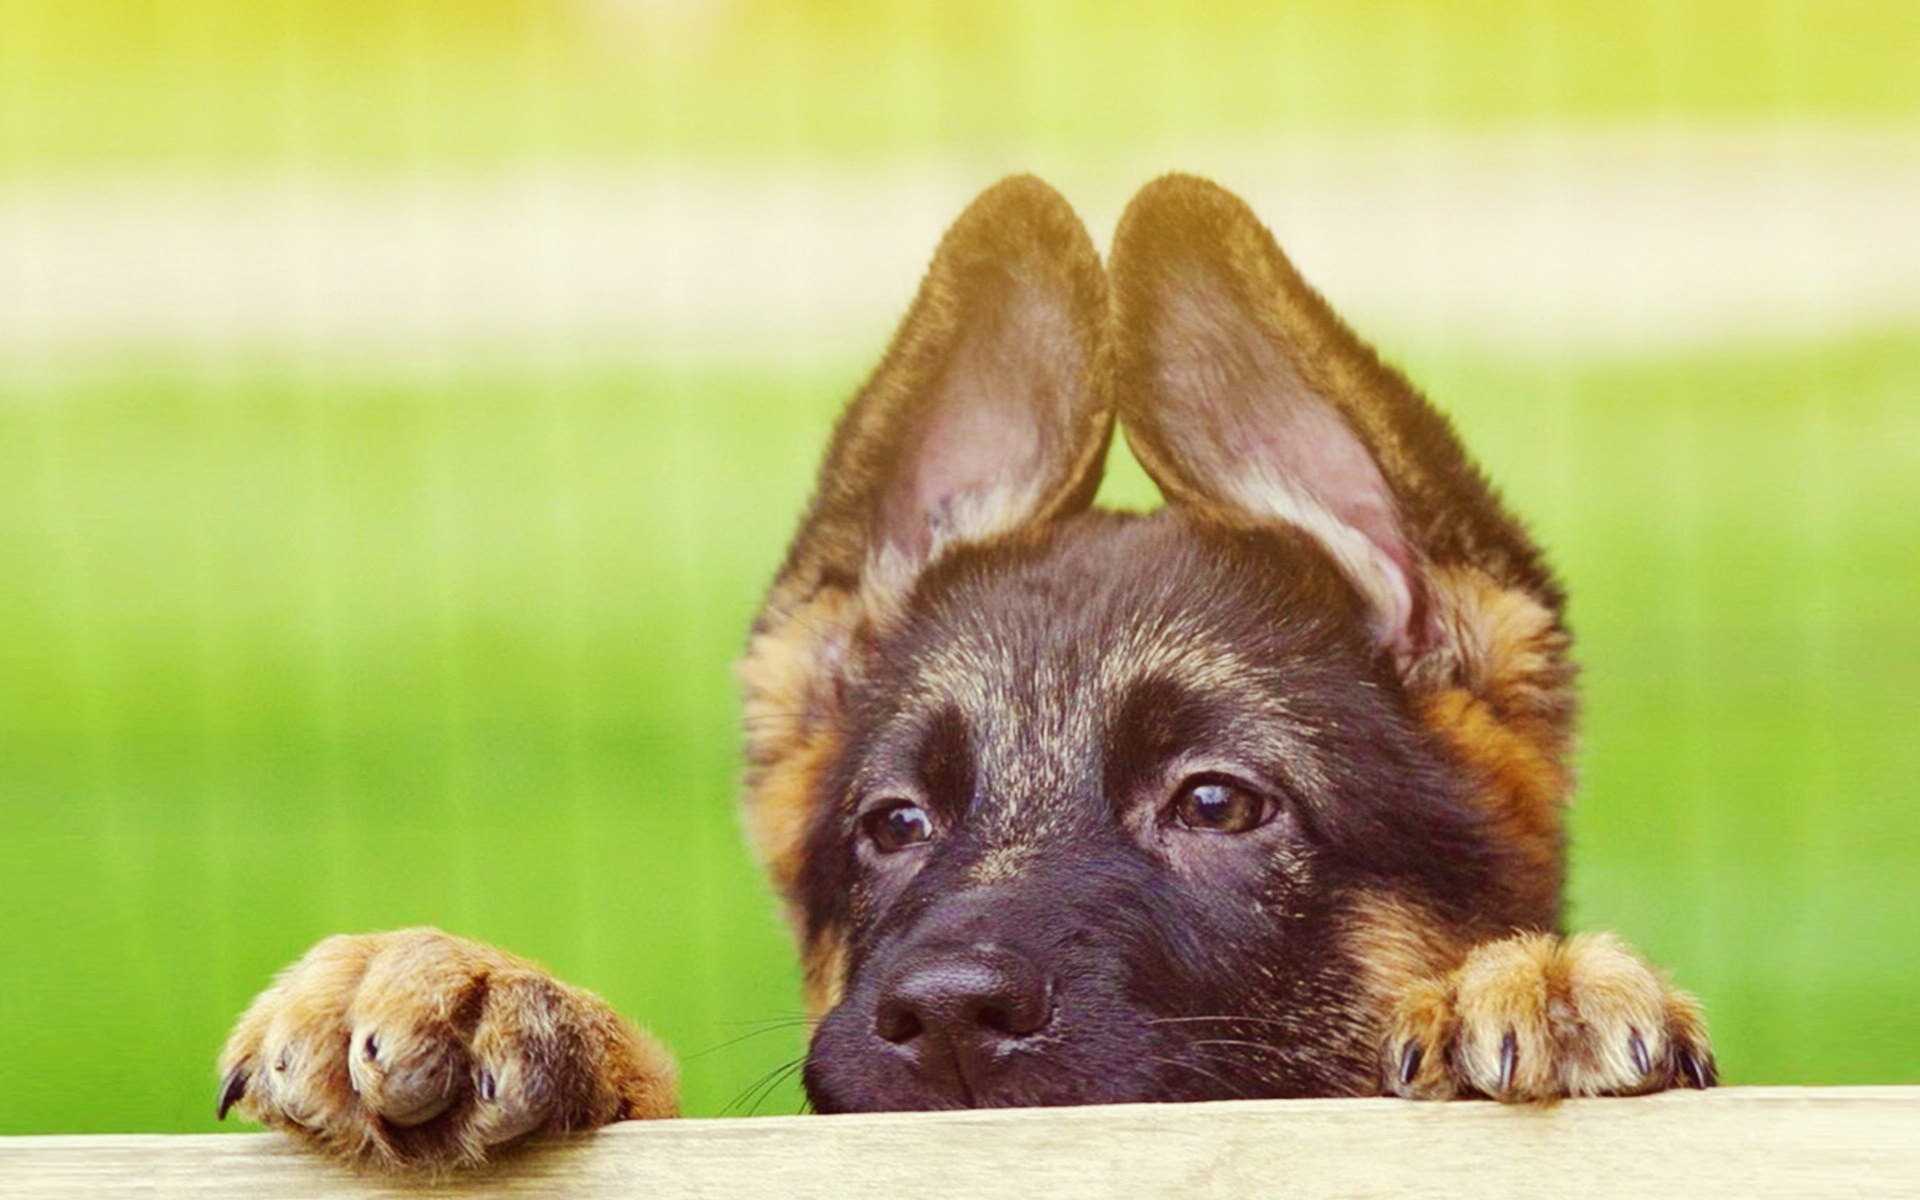 German Shepherd Wallpaper HD Best Collection With Puppy High